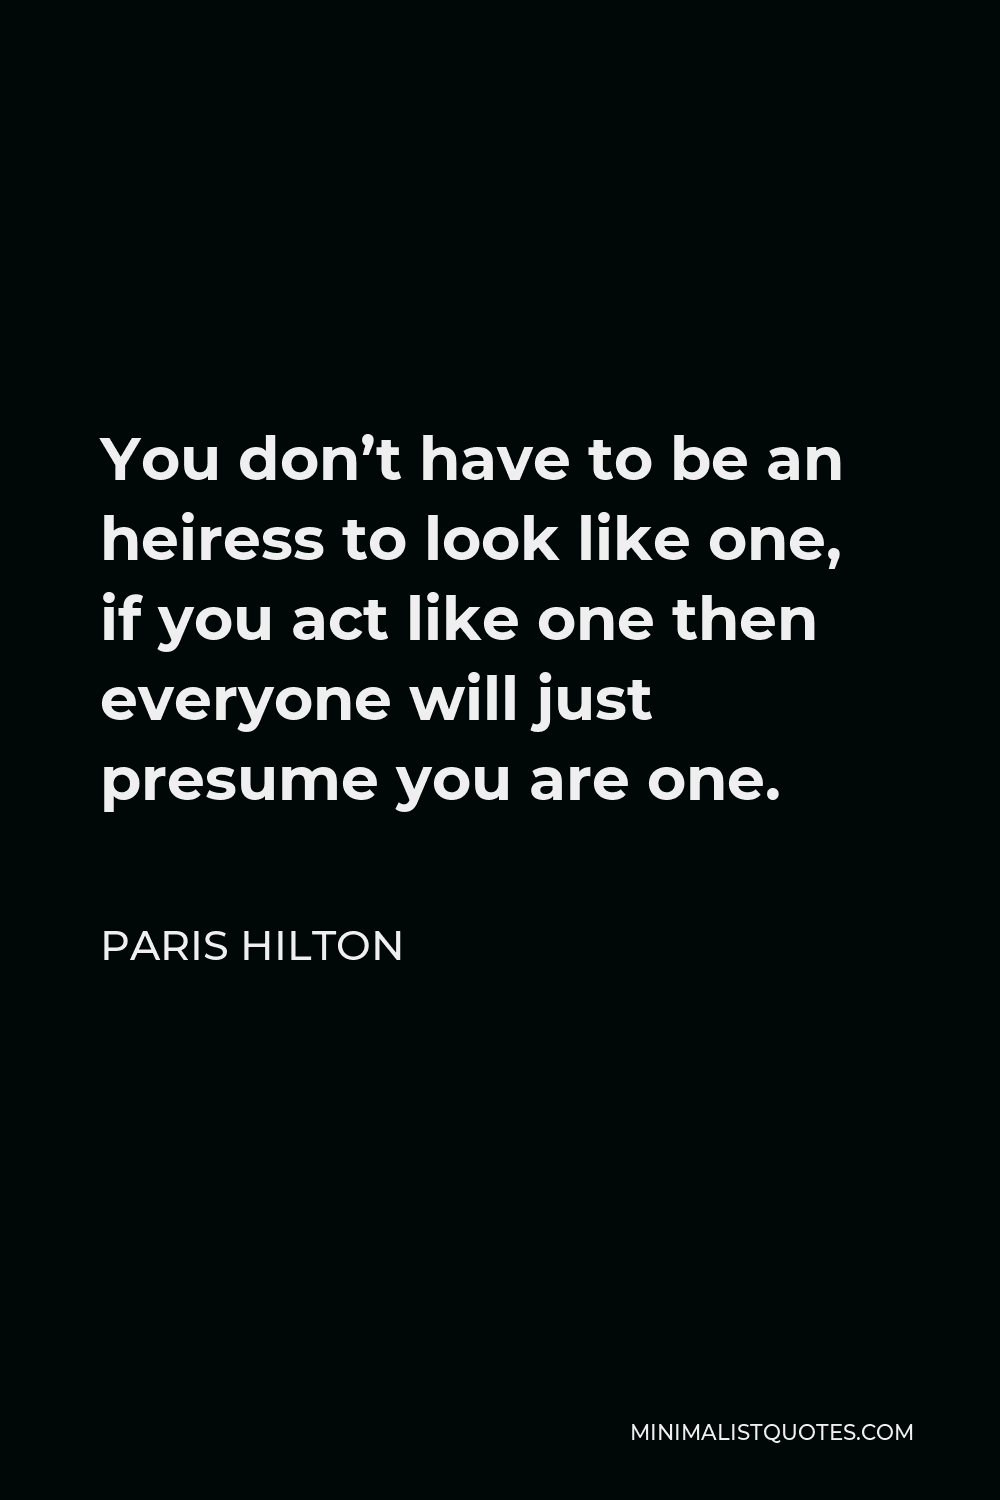 Paris Hilton Quote - You don’t have to be an heiress to look like one, if you act like one then everyone will just presume you are one.